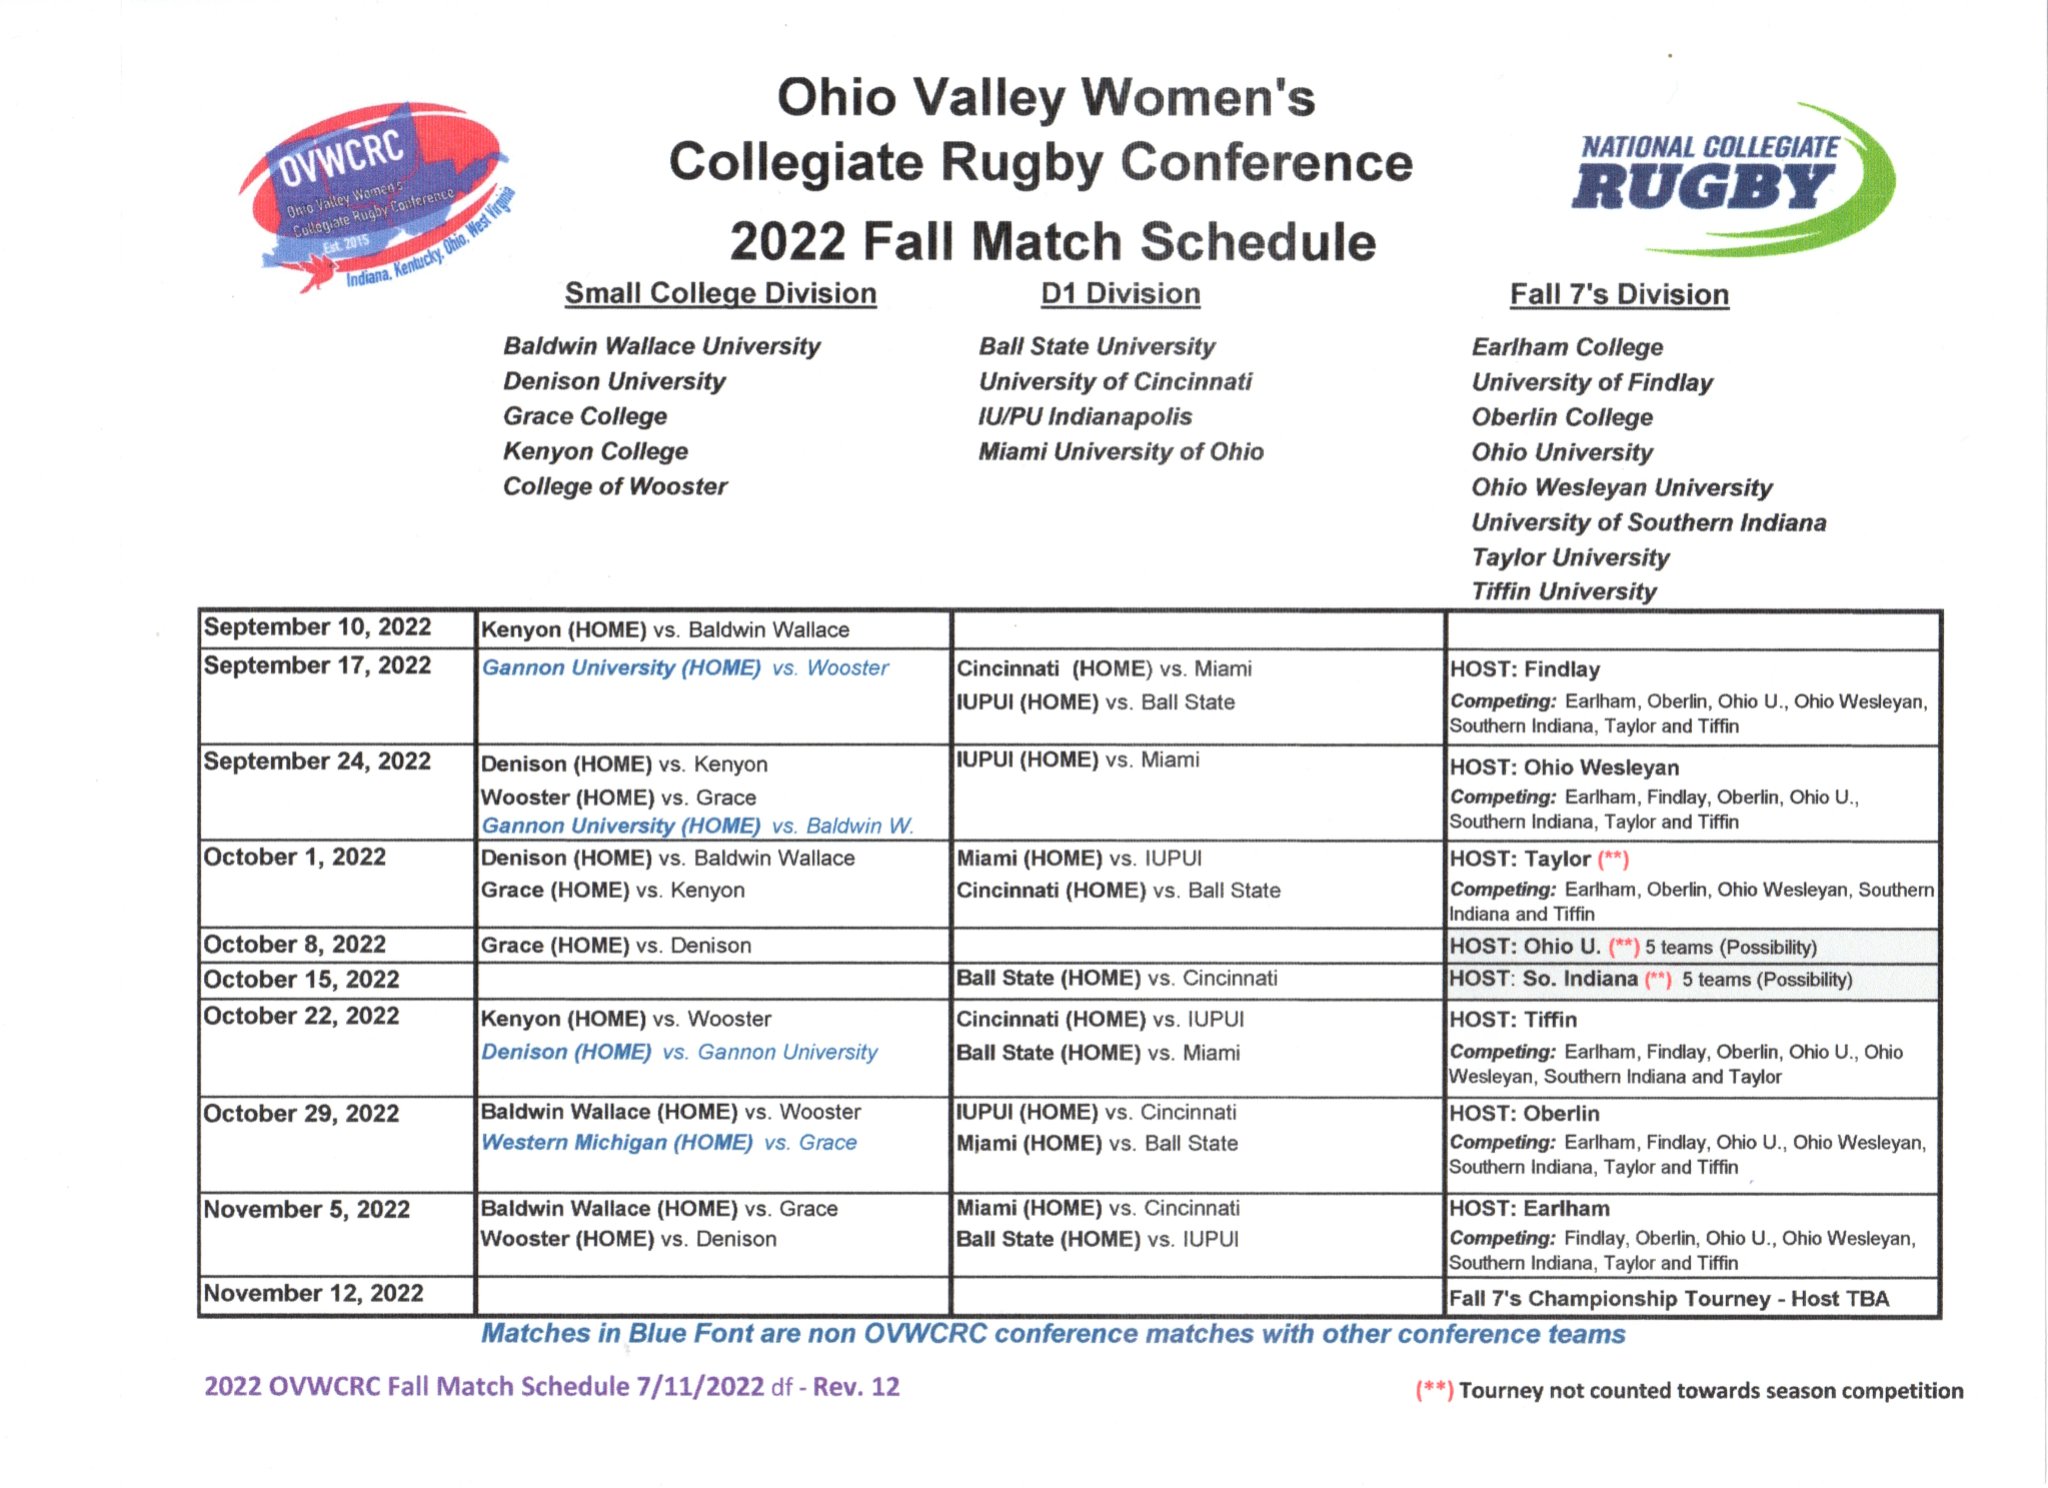 Ohio Valley rugby